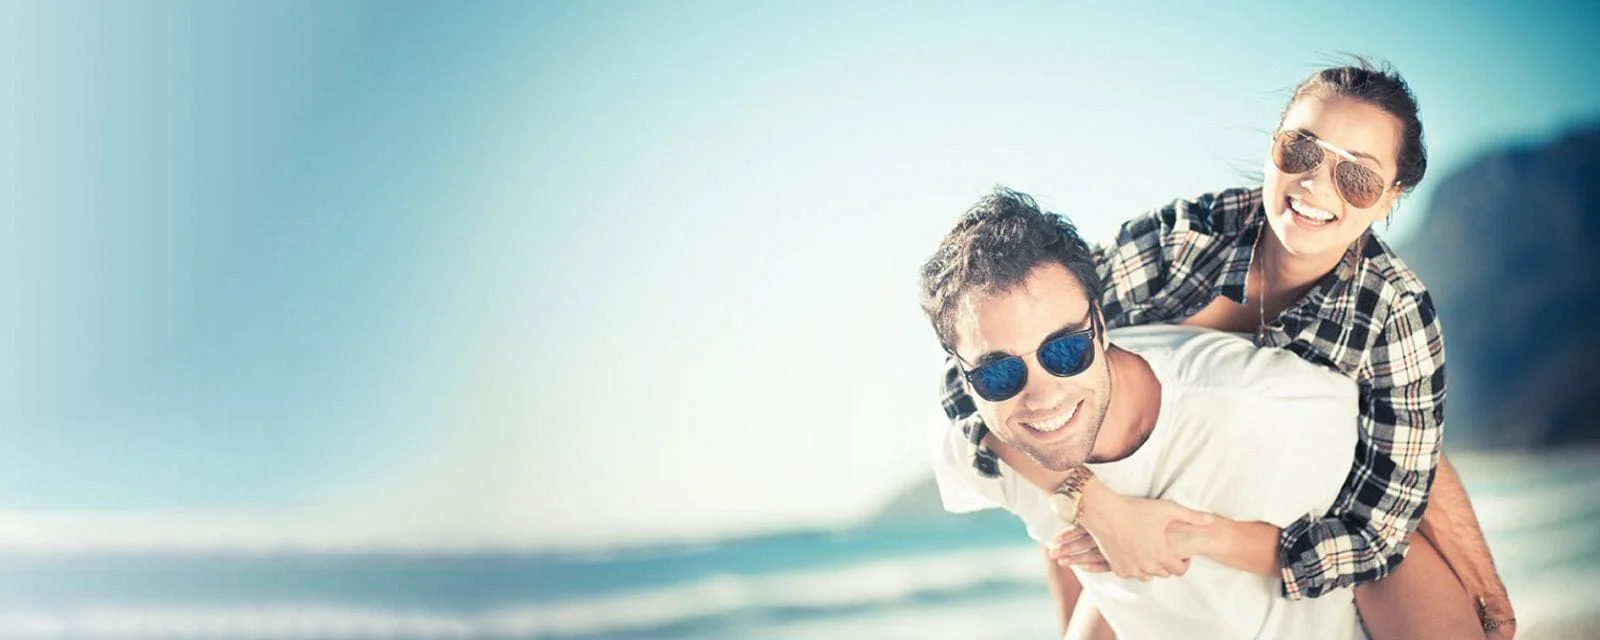 image of man and womand wearing sunglasses.